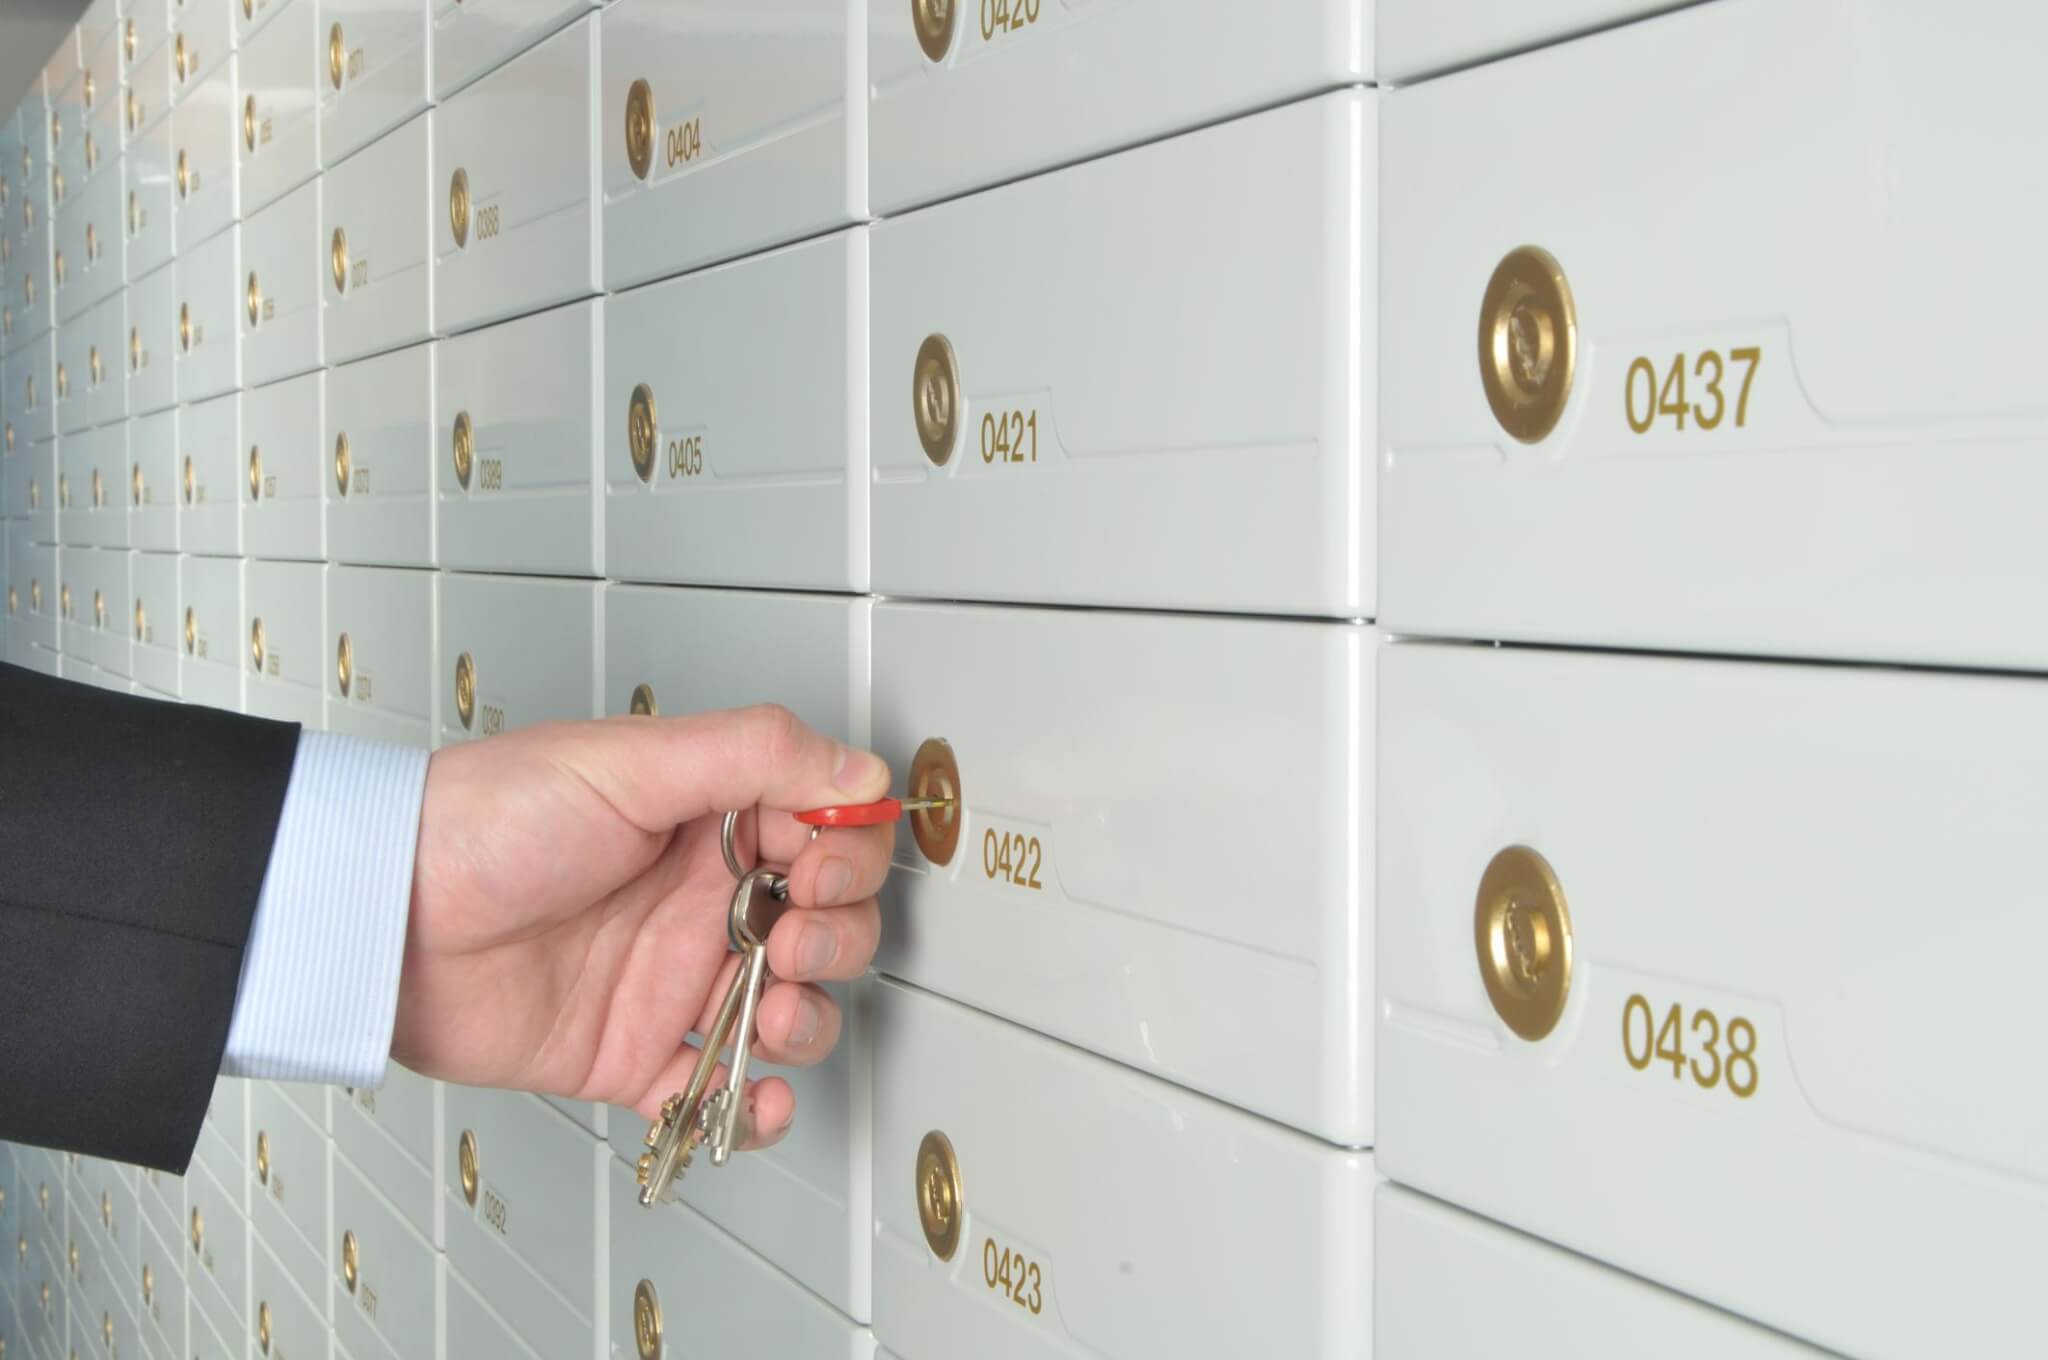 What You Need to Know About Your Safe Deposit Box Before It’s Too Late